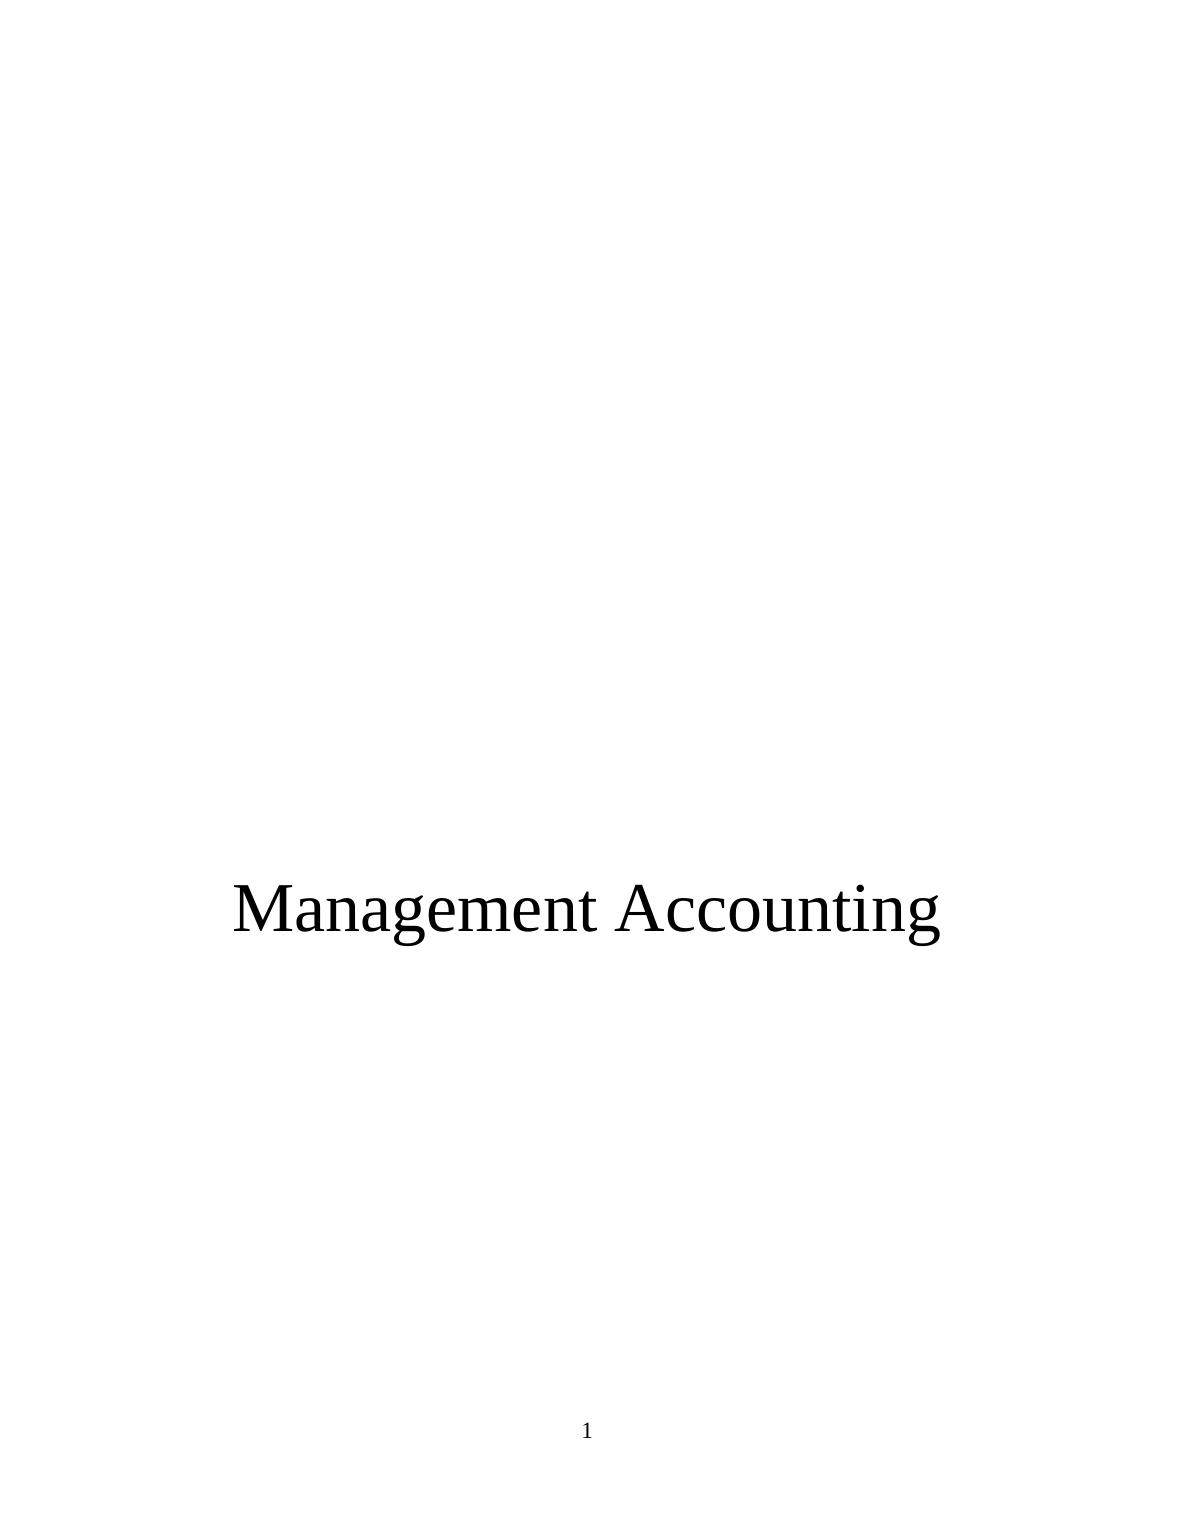 Management Accounting Concept - Zylla_1